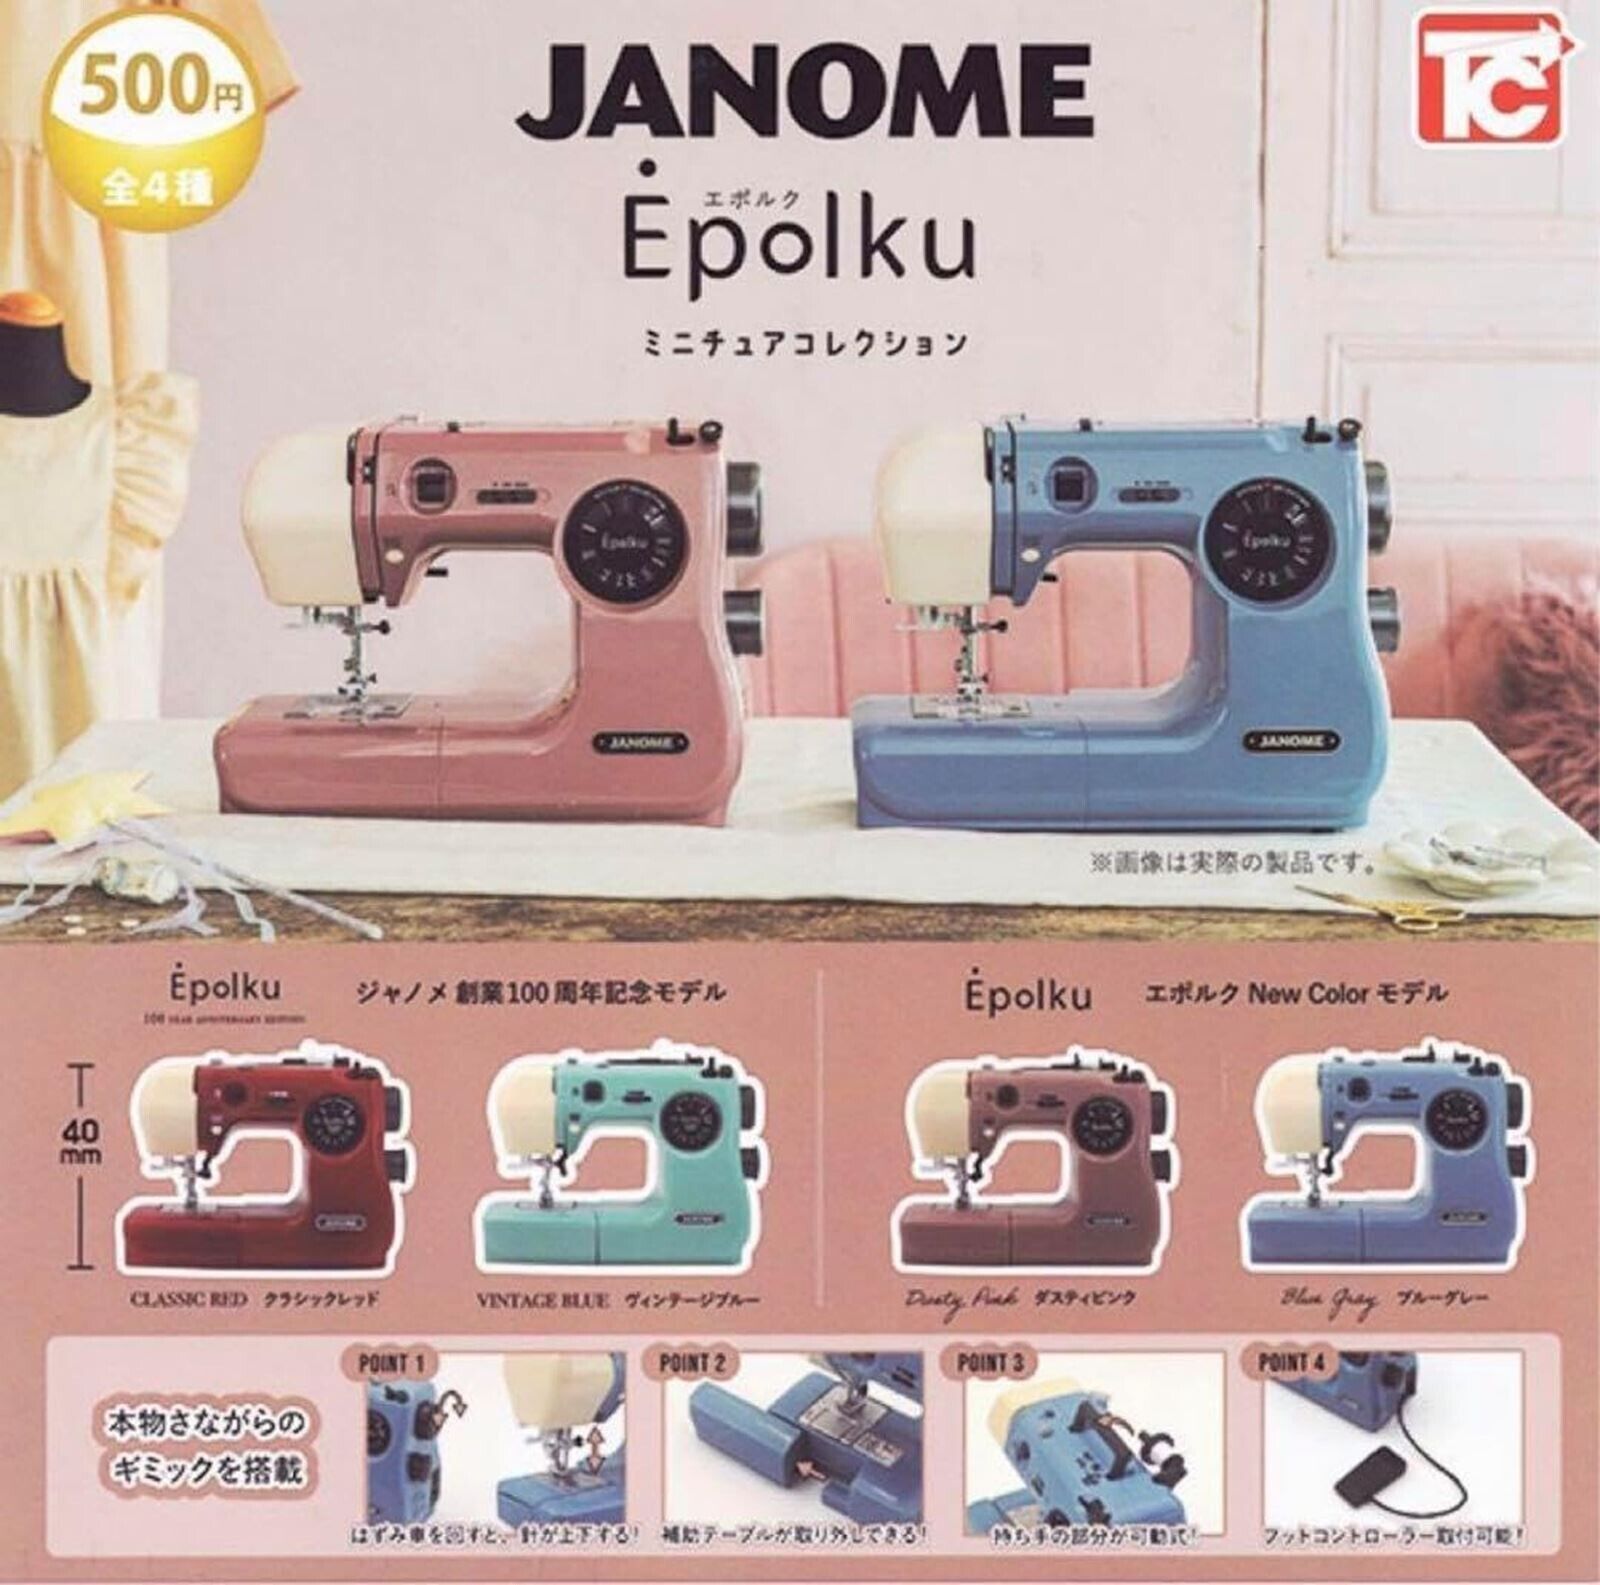 JANOME Epolku Miniature Collection 4 Types Complete Set Capsule Toy Japan